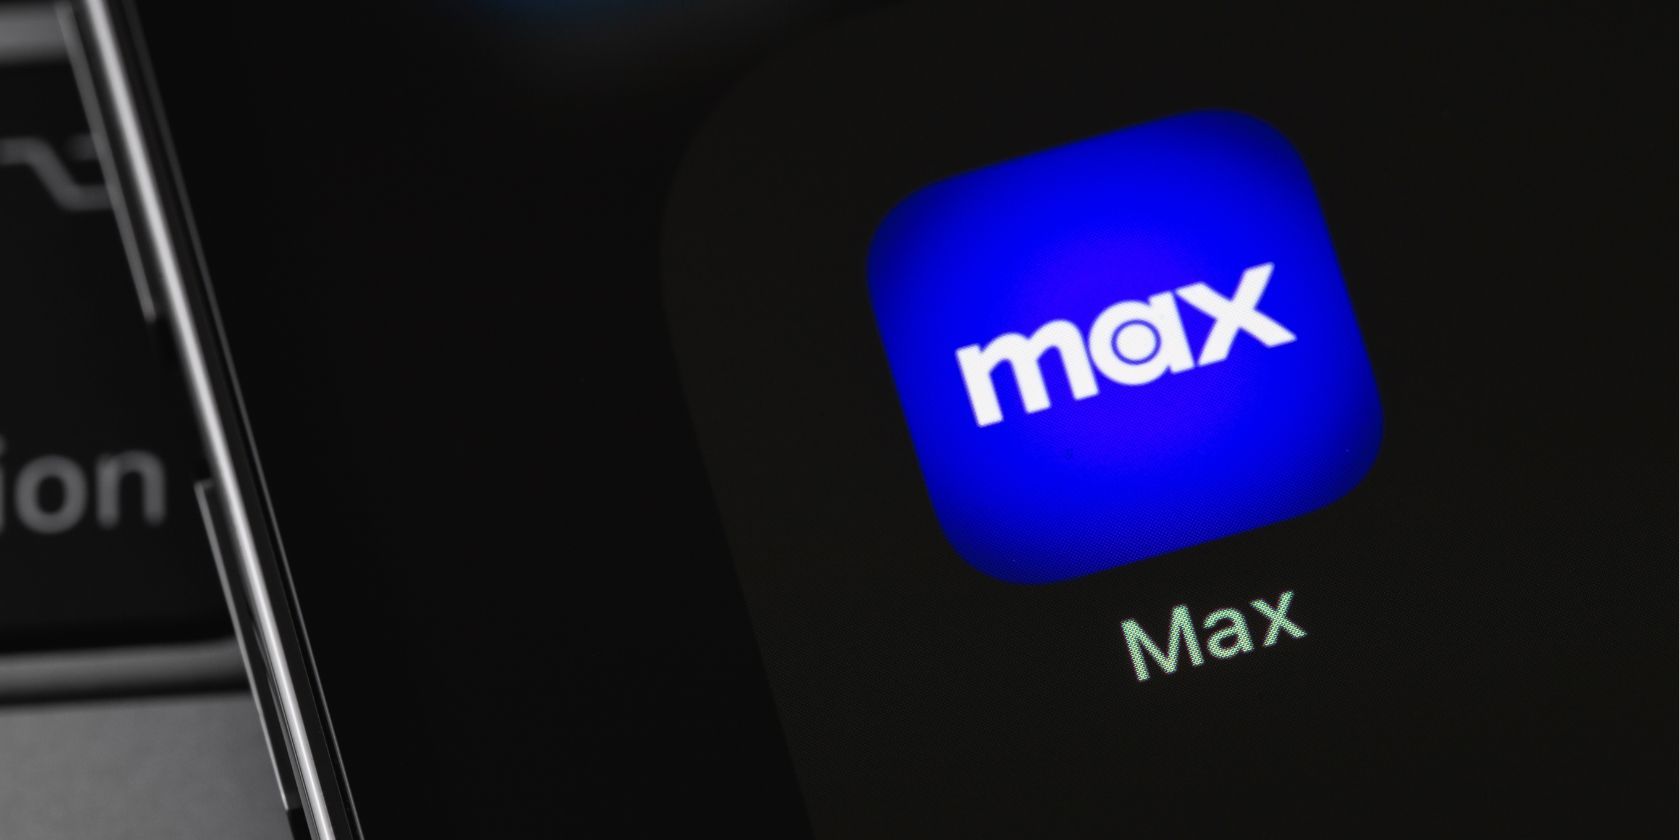 the max logo on a smartphone